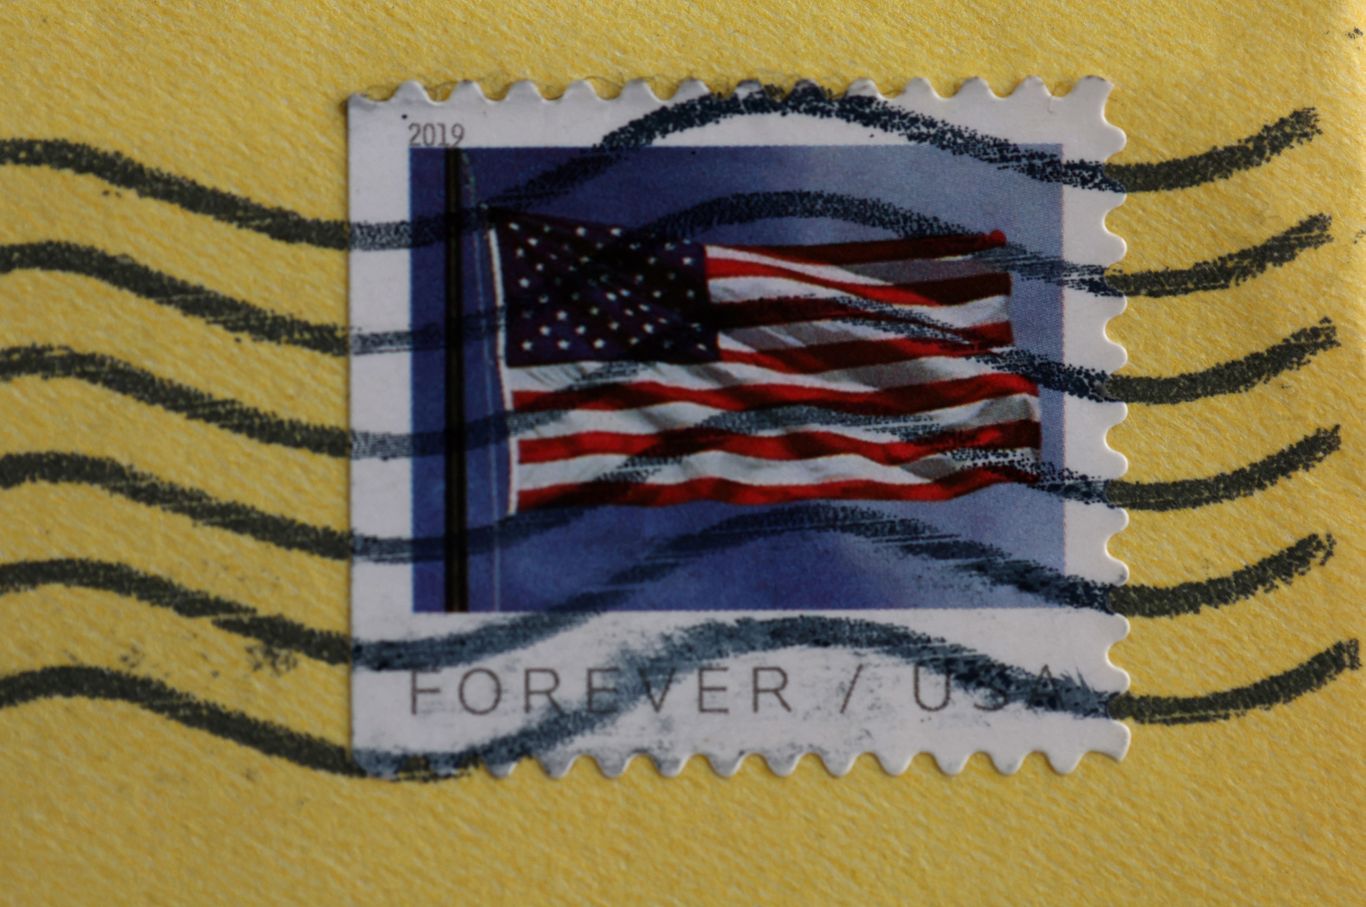 USPS stamp prices going up: Forever first-class stamps now cost 68 cents